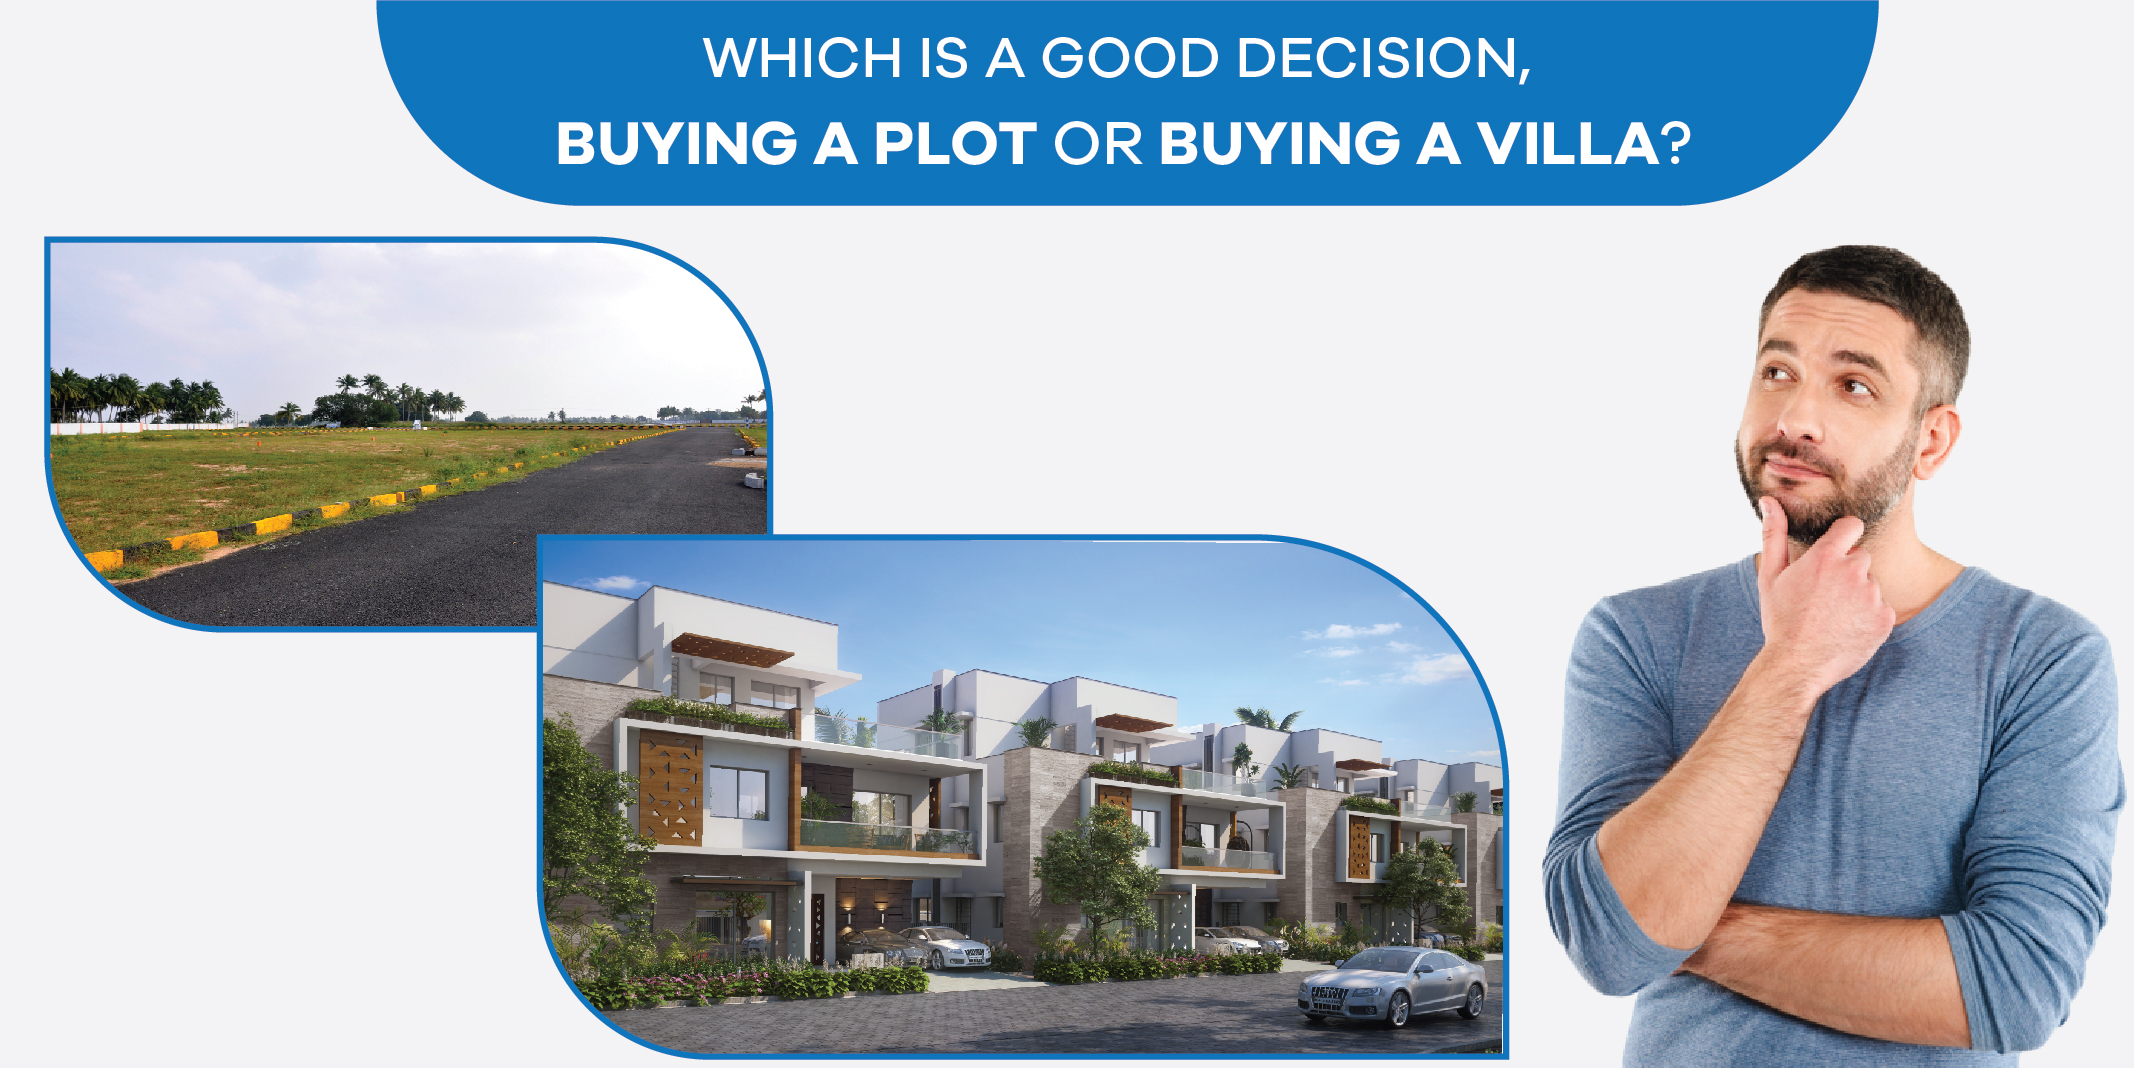 Which is a good decision, buying a plot or buying a villa?